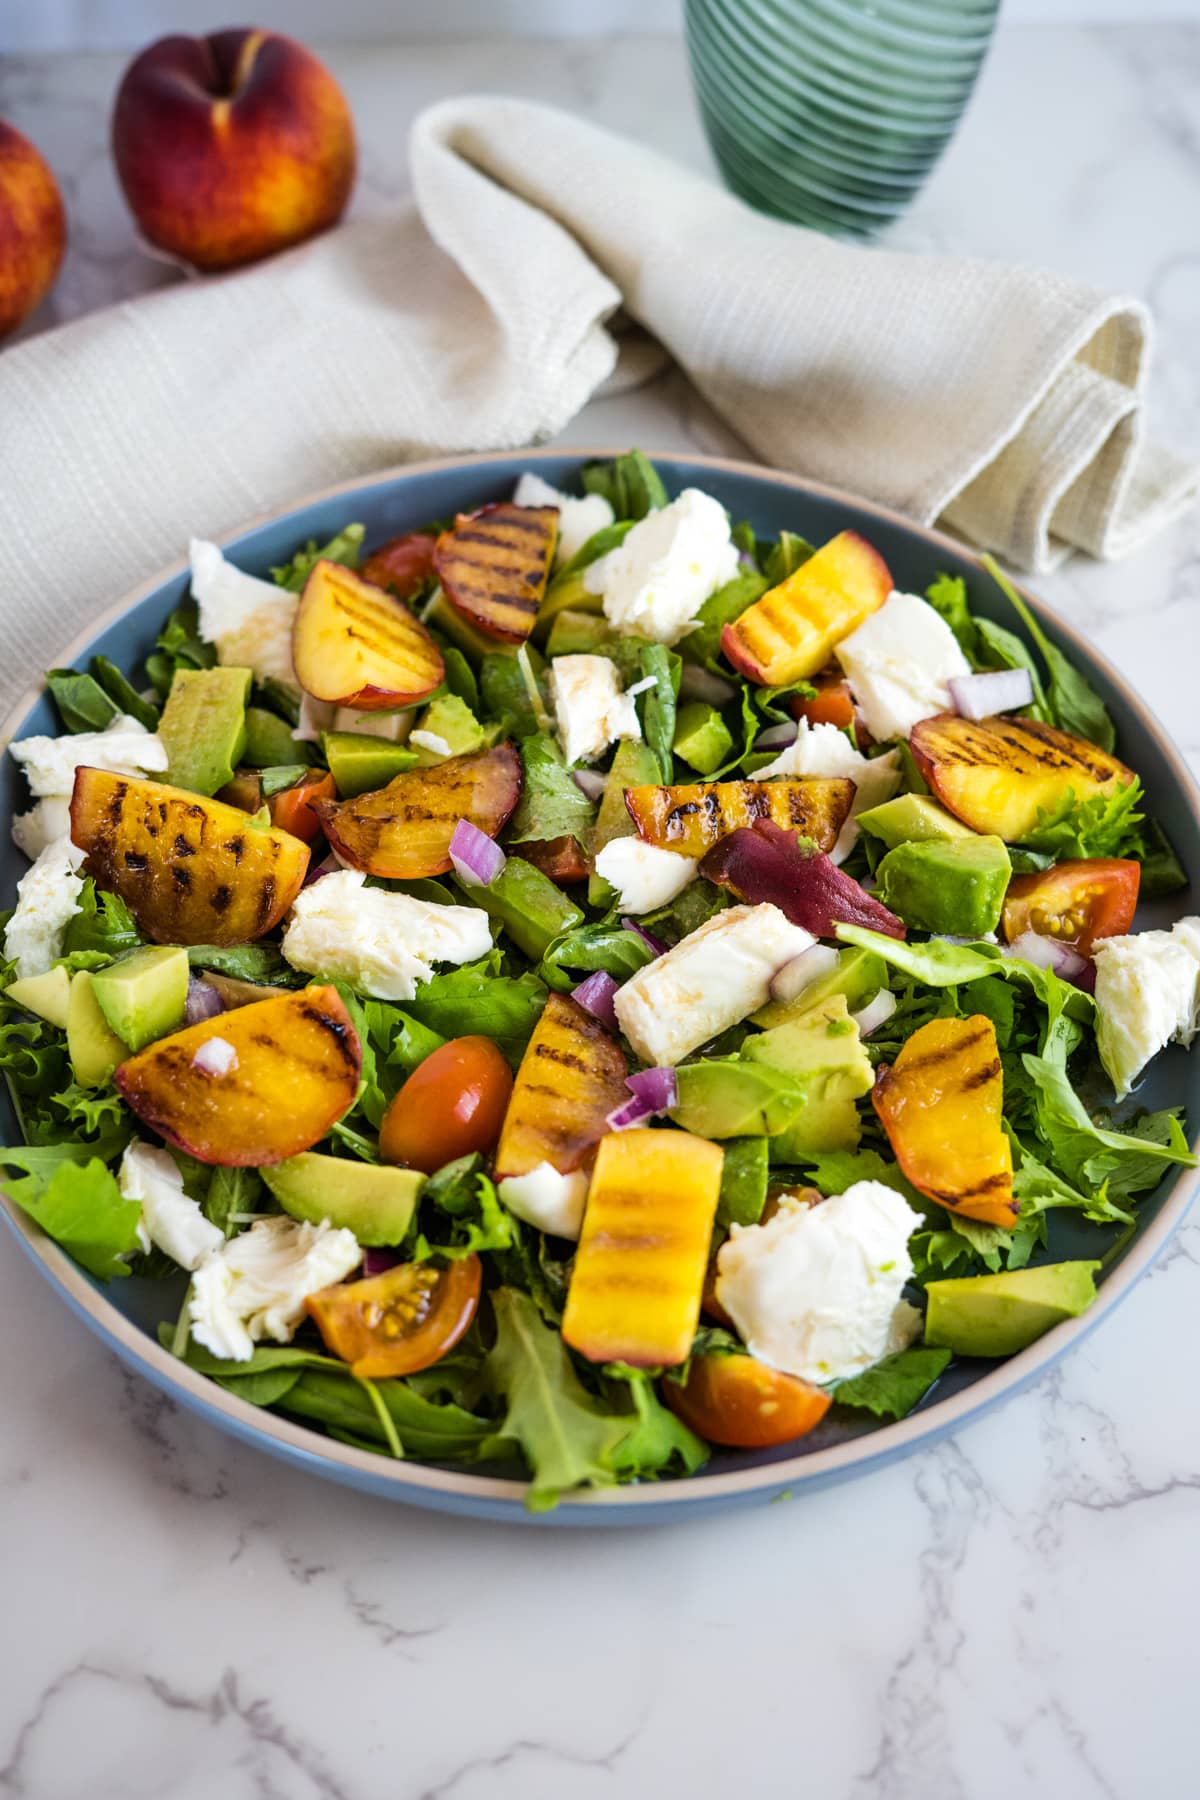 grilled peaches, mozzarella and avocado salad on a plate.